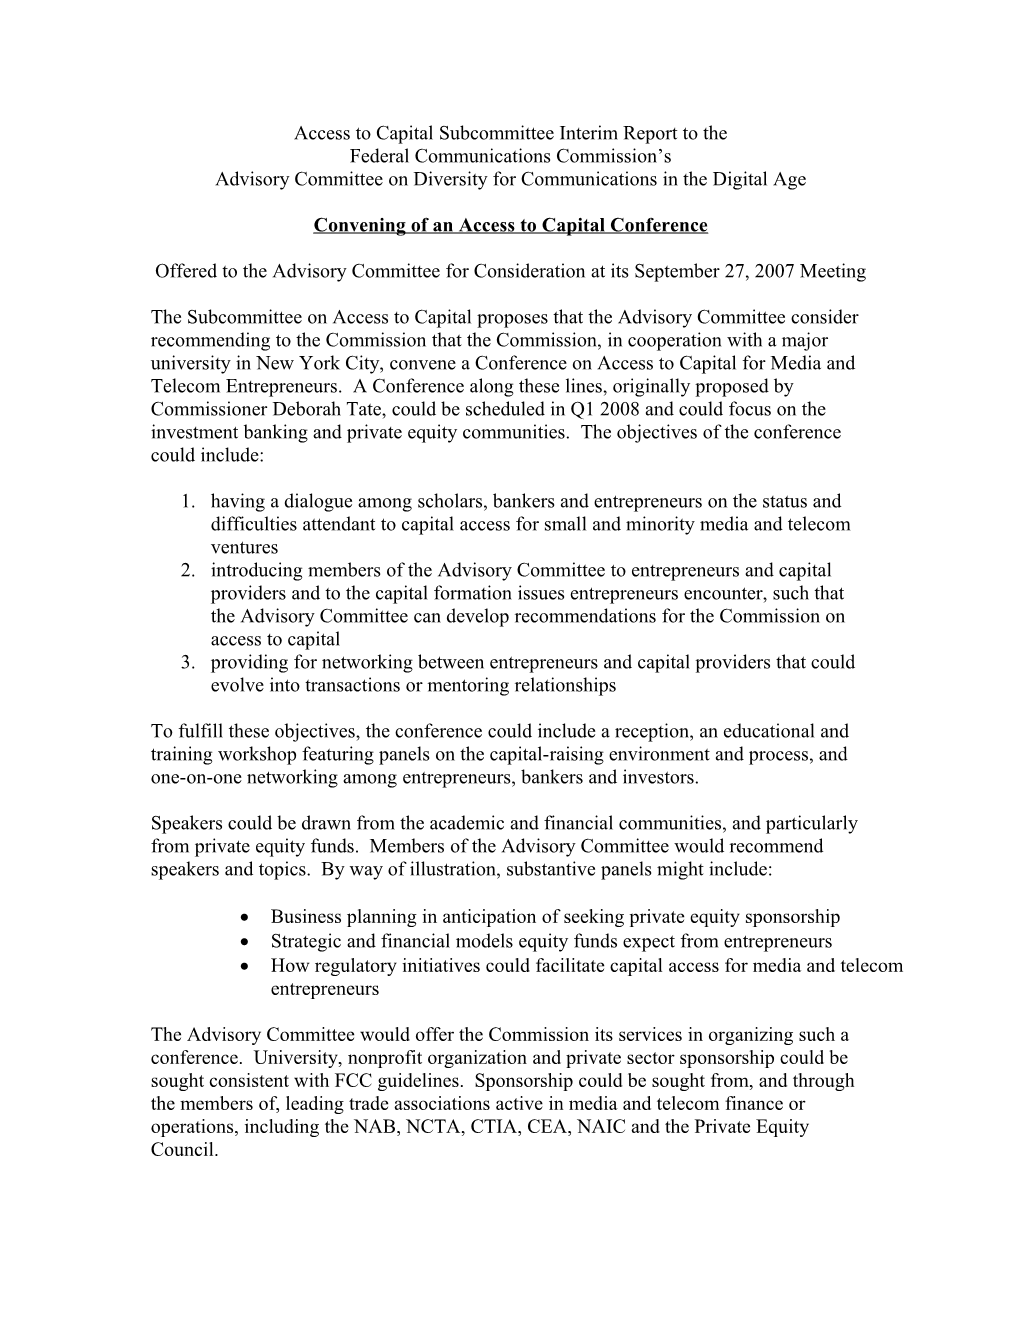 Access to Capital Subcommittee Interim Report to The